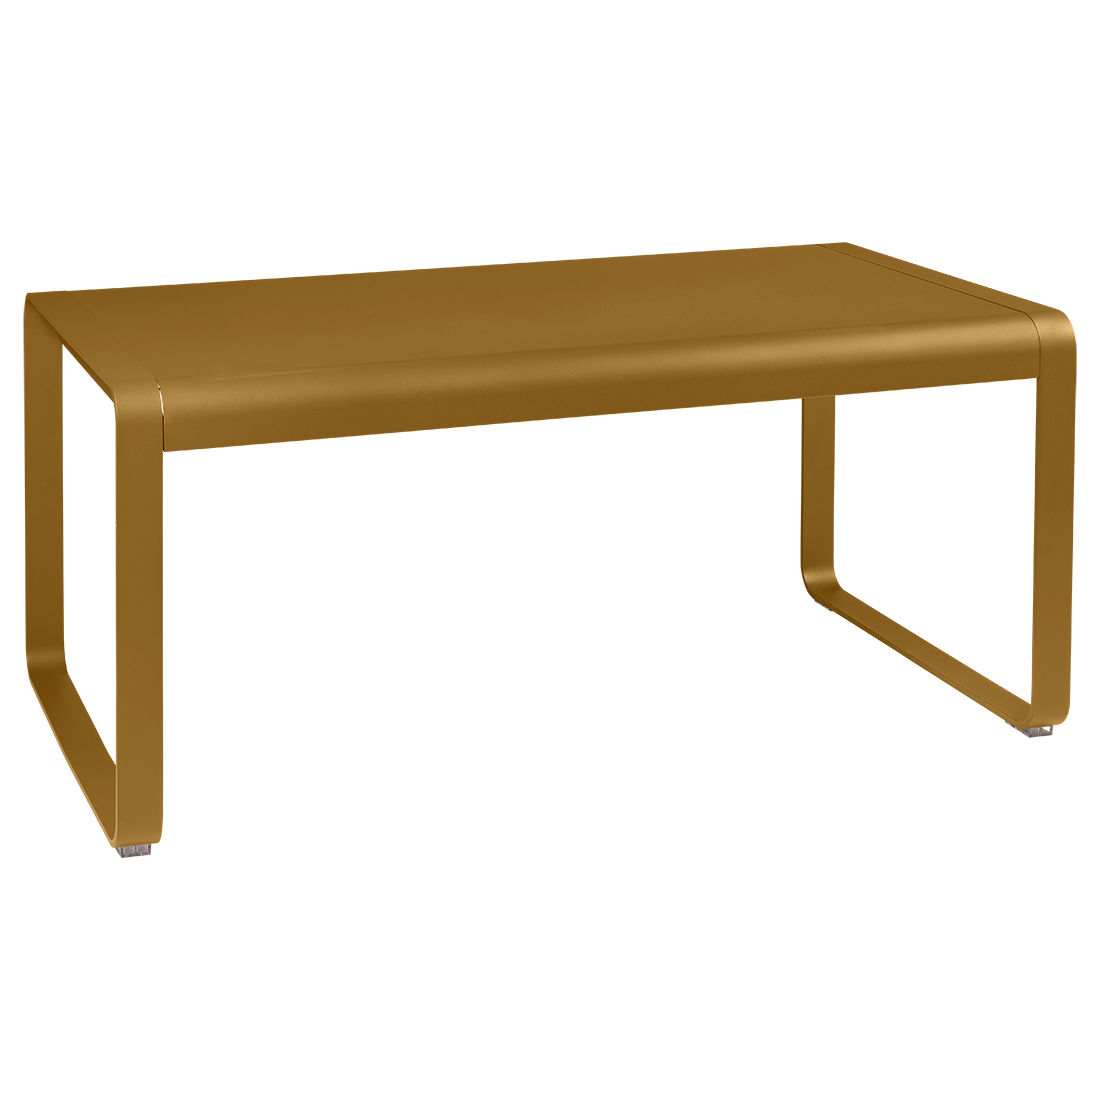 BELLEVIE MID HEIGHT TABLE 140 X 80 CM